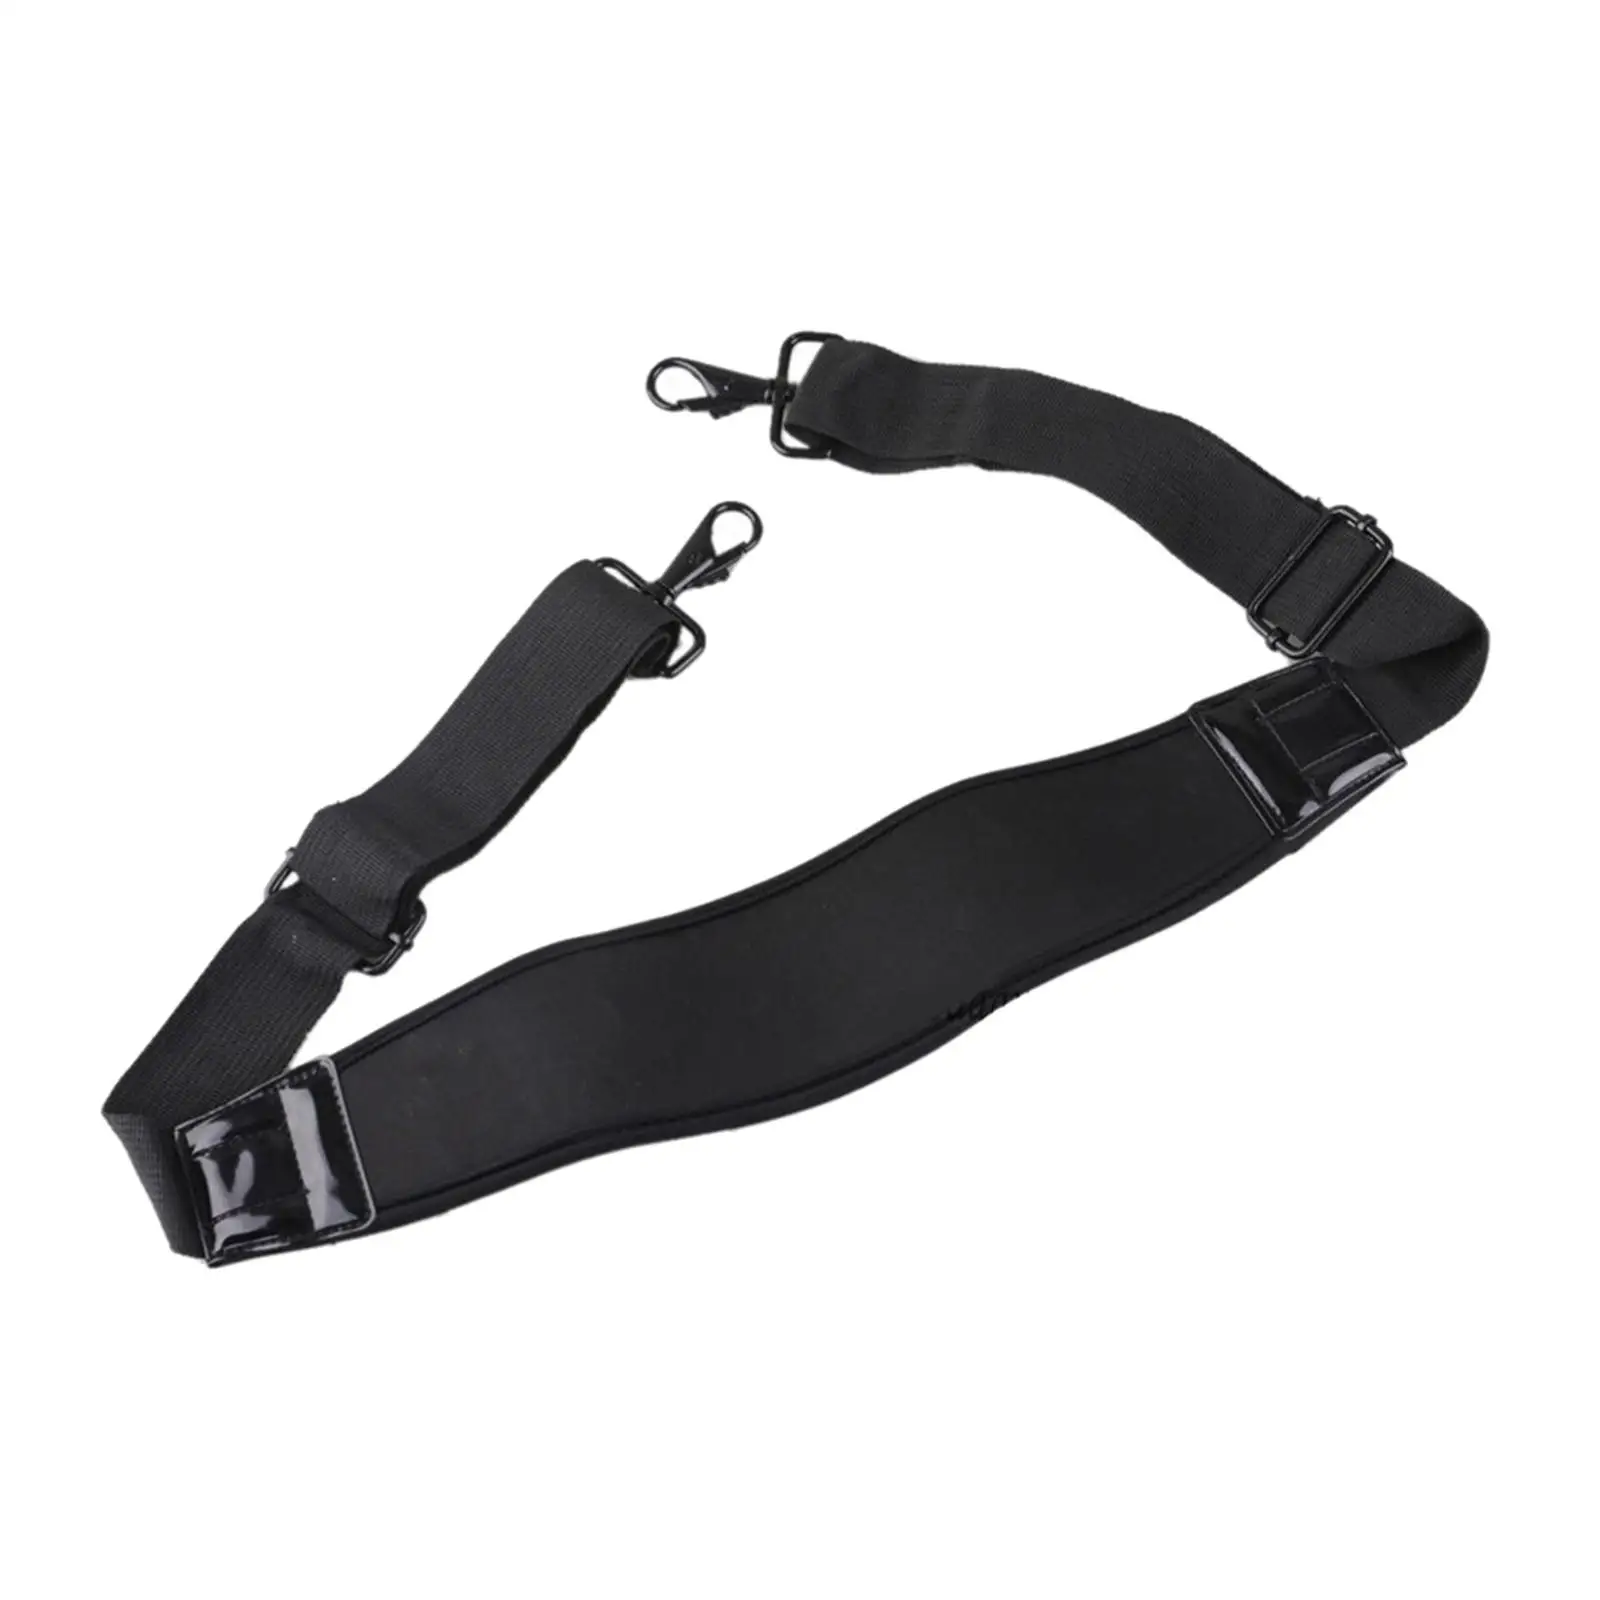 Universal Shoulder Strap Belt Durable Black Anti Slip 52inch Soft with Metal Hooks Thick Padded for Camera Briefcase Bag Laptop